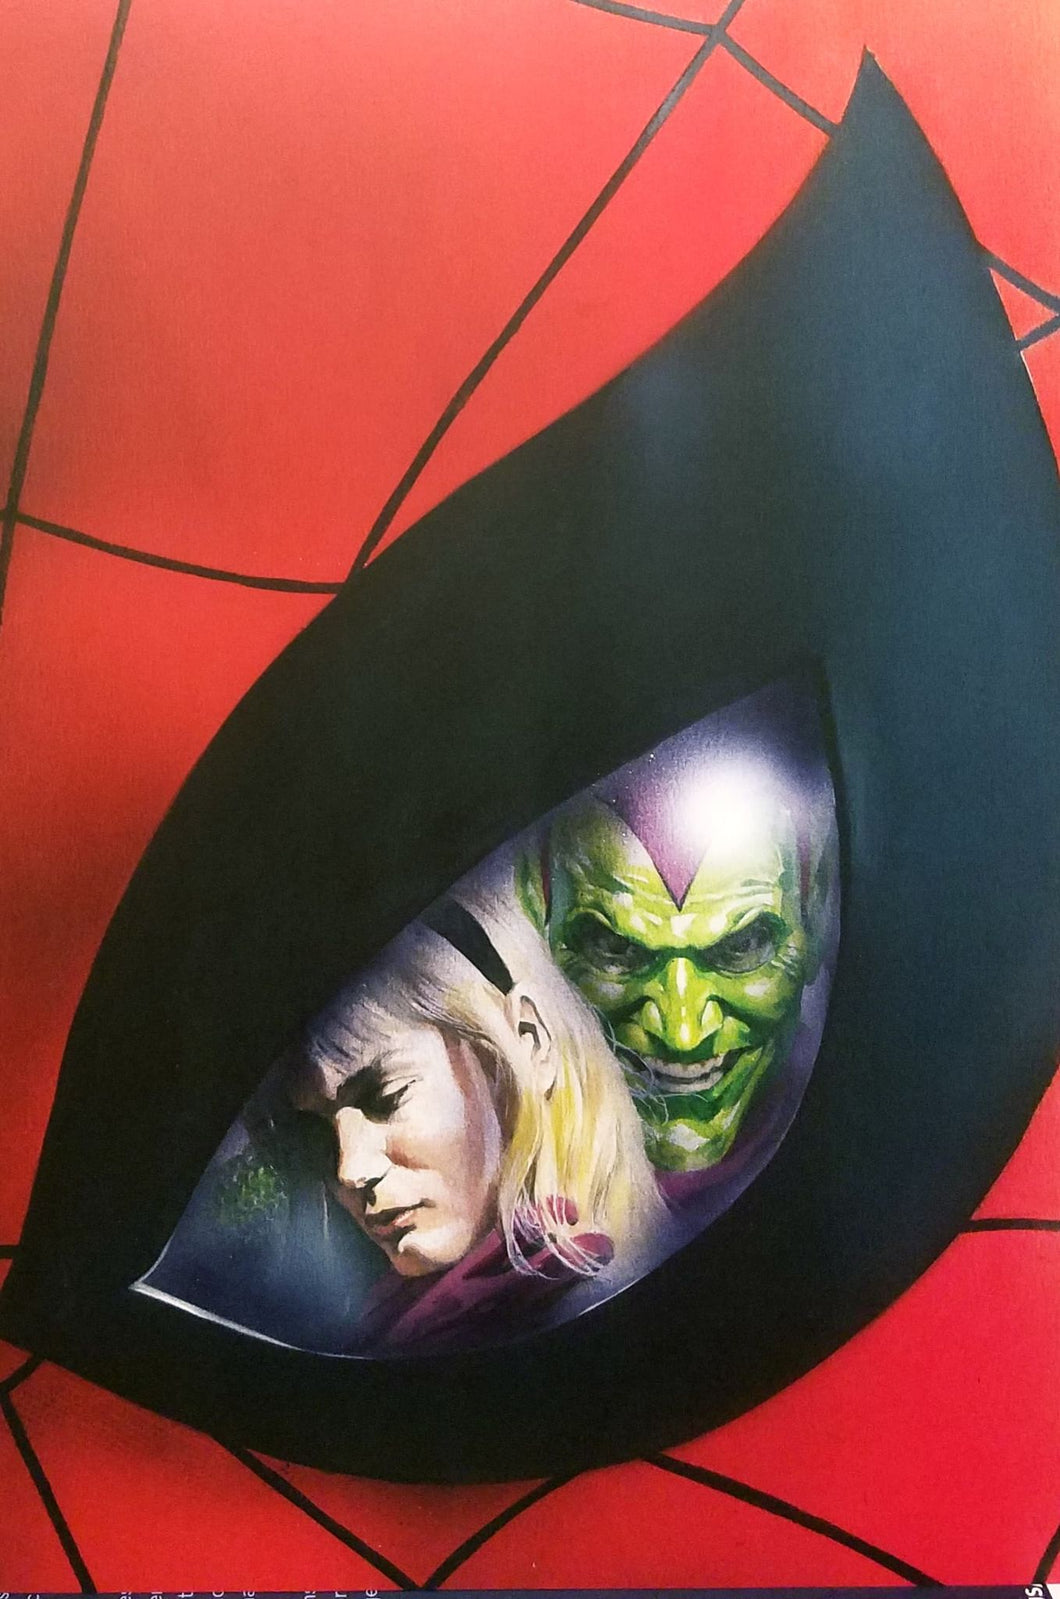 Spider-Man Gwen Stacy Marvels 11x16 Art Print by Alex Ross, New cardstock